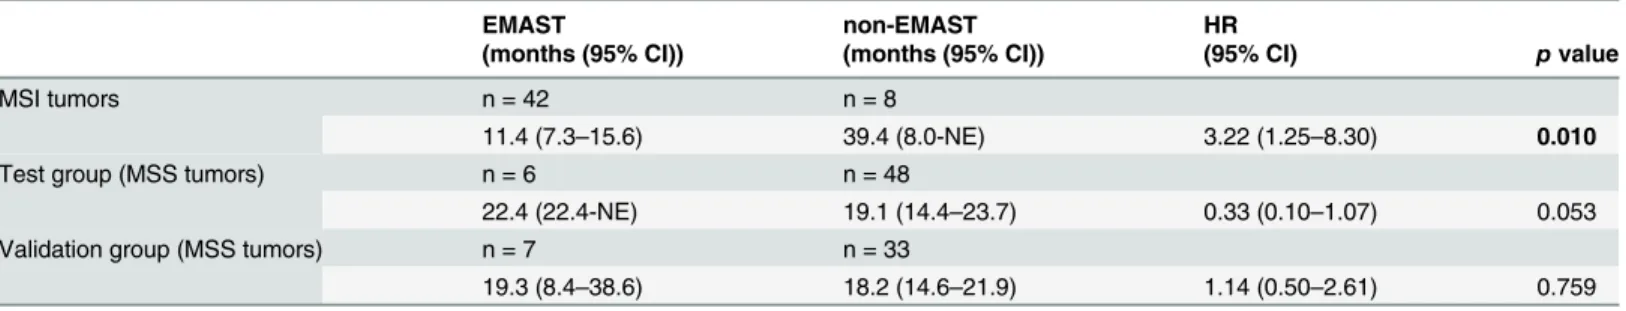 Table 3. Overall survival of patients with MSI and MSS tumors, subdivided by EMAST and non-EMAST tumors.